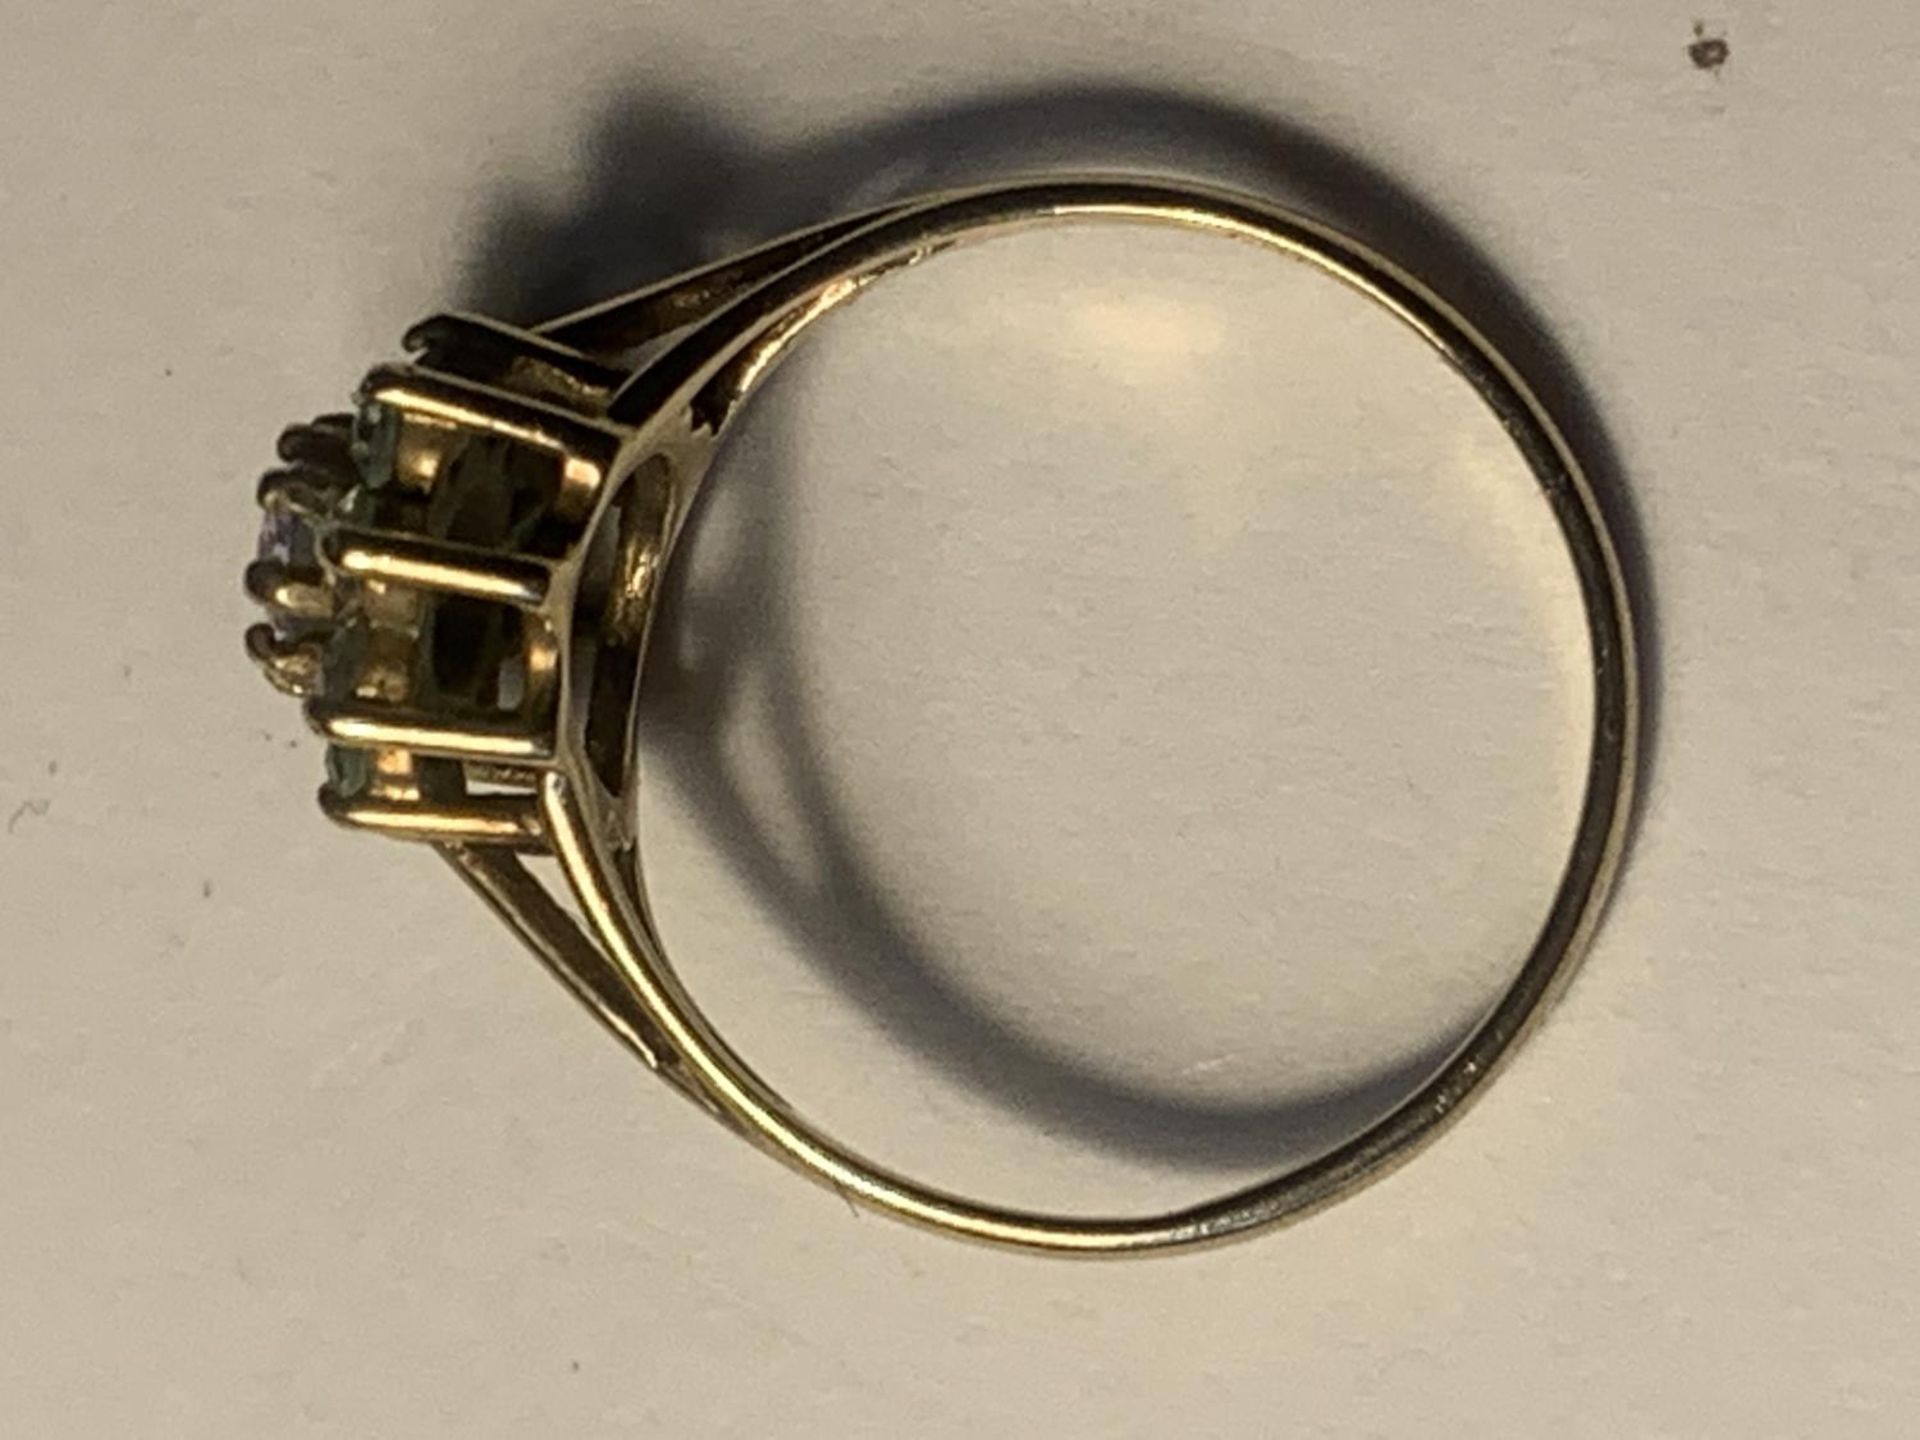 A 9 CARAT GOLD RING WITH CUBIC ZIRCONIAS IN A FLOWER DESIGN SIZE M GROSS WEIGHT 1.7 GRAMS - Image 3 of 3